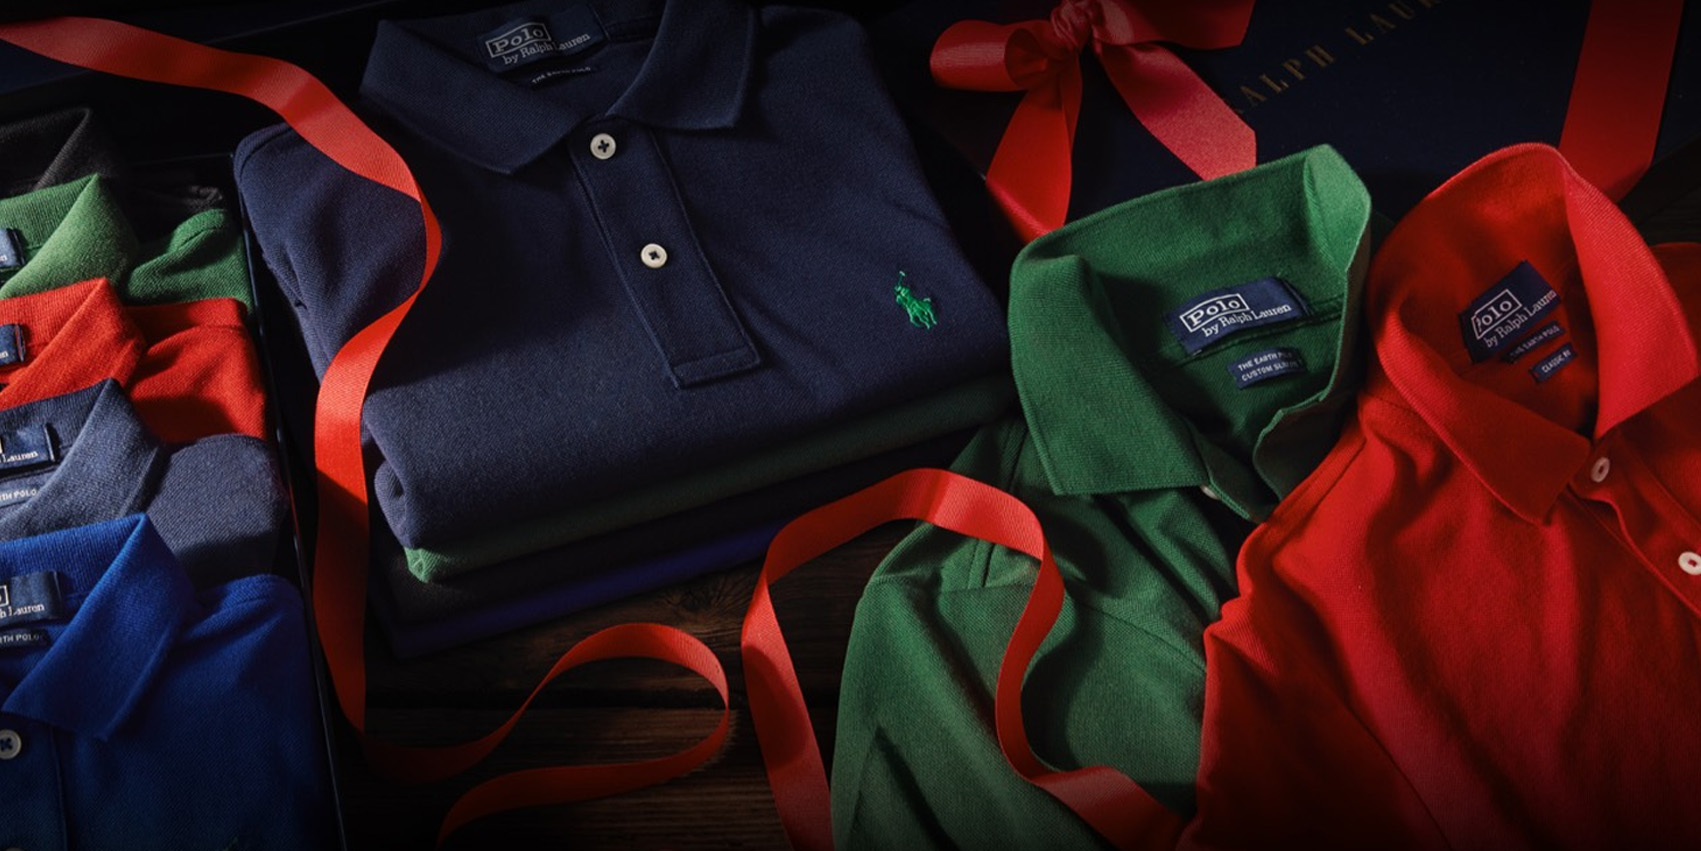 Ralph Lauren's Holiday Gift Guide is full of classic they will enjo ...